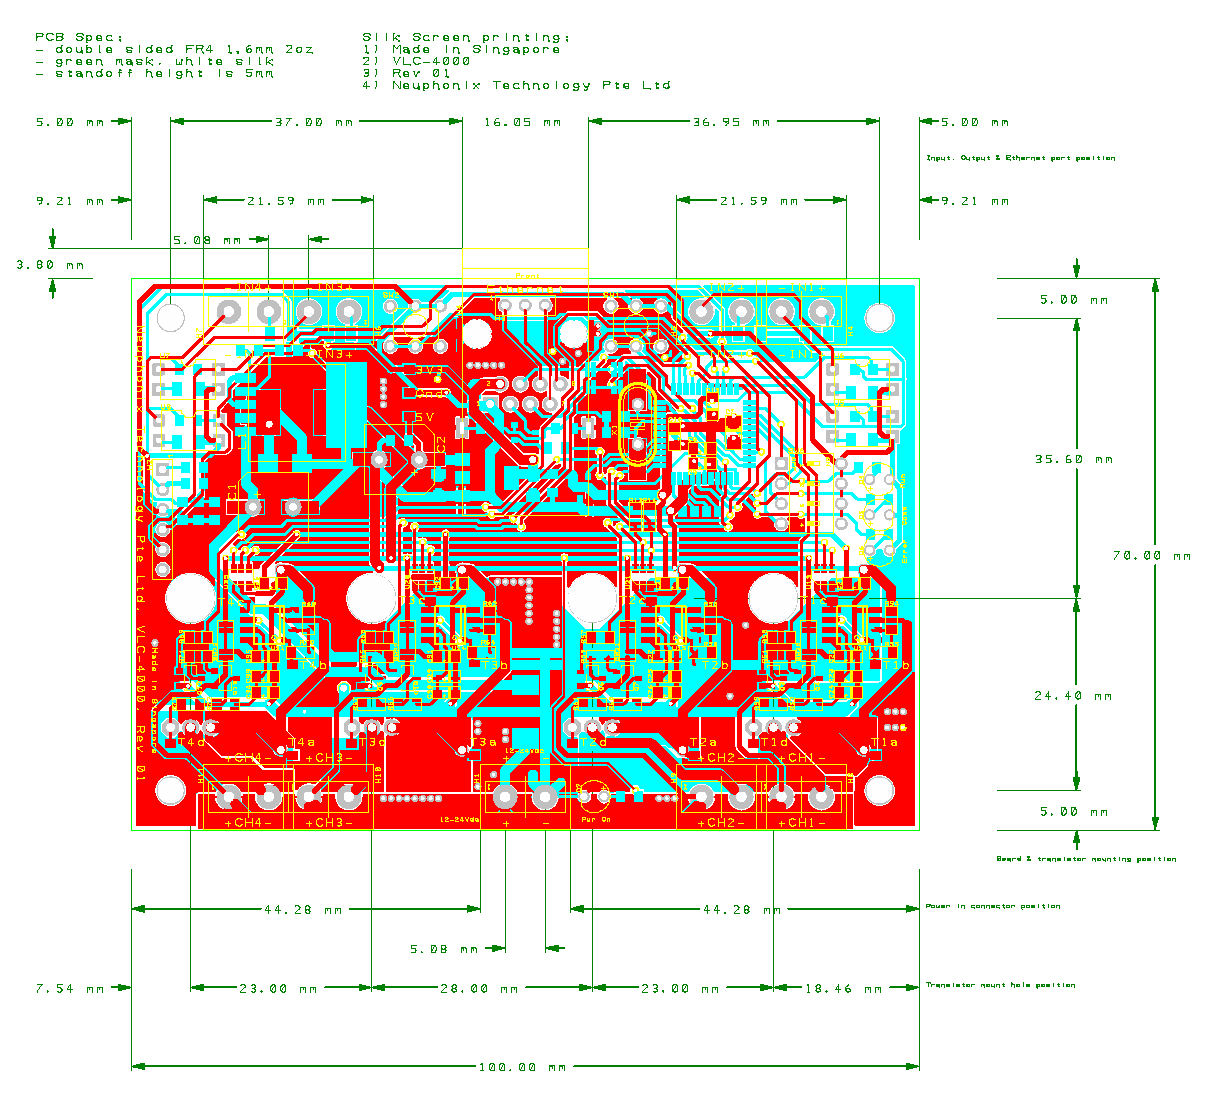 PCB design and layout for electronic prototype